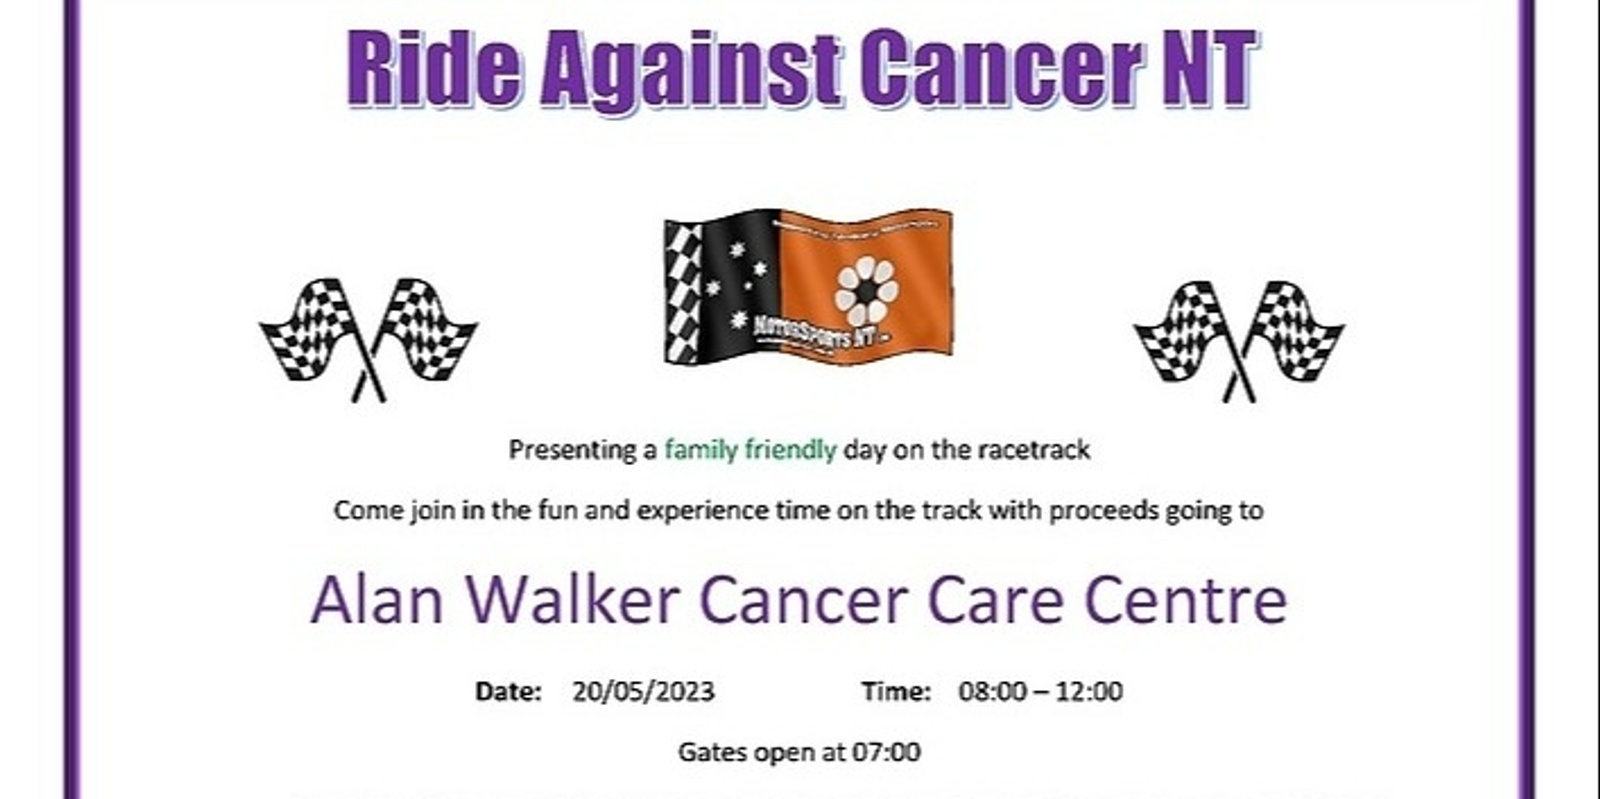 Banner image for Ride Against Cancer NT